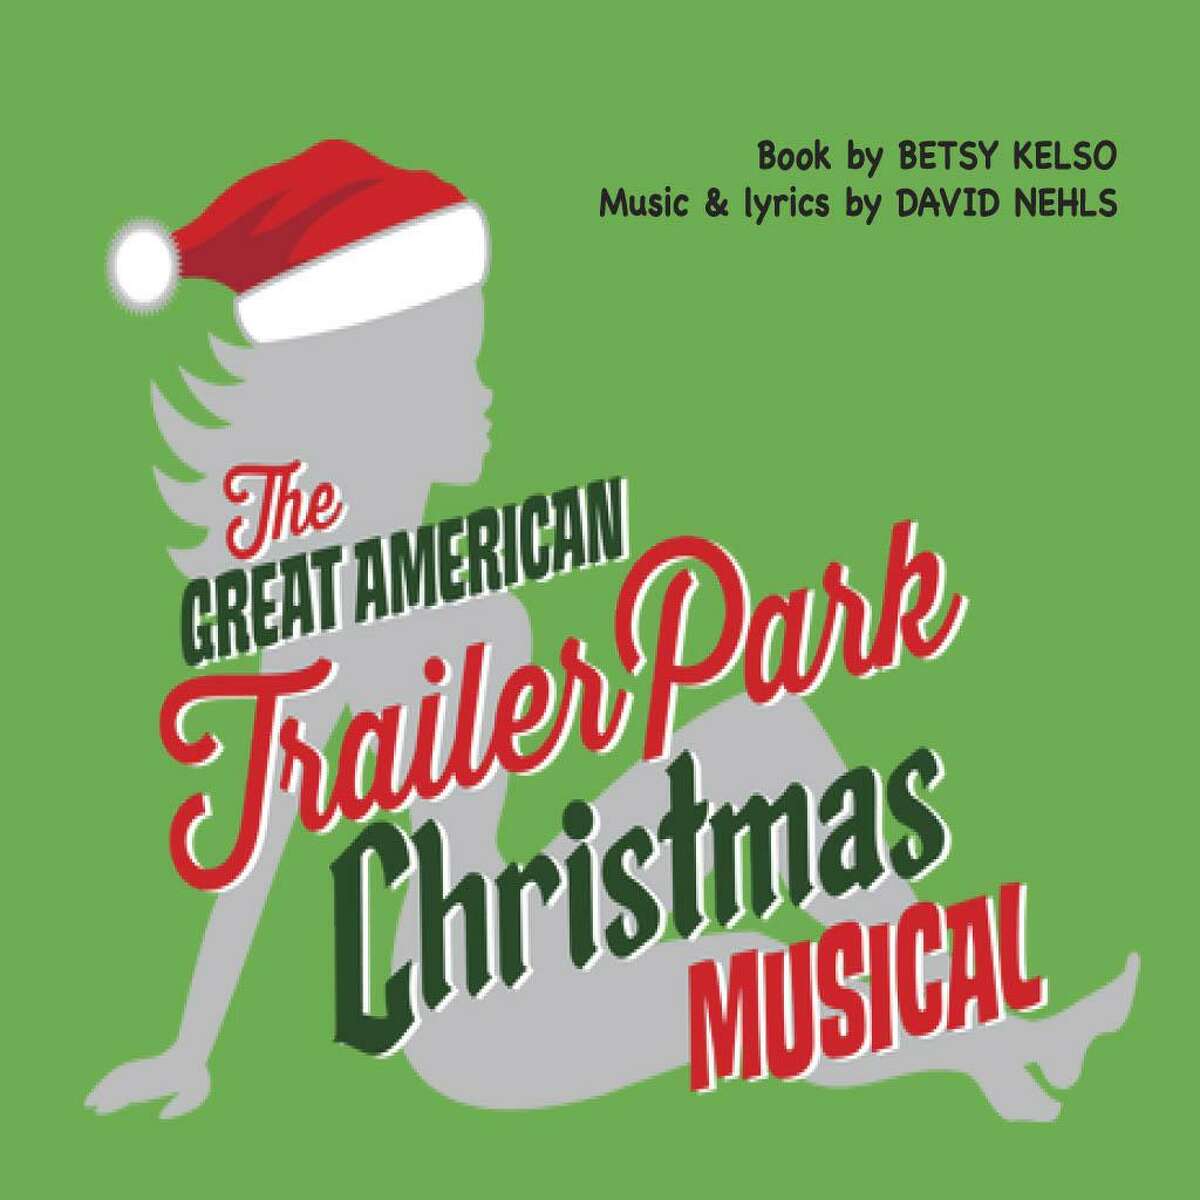 “The Great American Trailer Park Christmas Musical” will be performed at the Phoenix Stage Company, Oakville, Nov. 30-Dec. 15, followed by “Neverland Christmas” with selected date peformances, Nov. 30, Dec. 7 and Dec. 14.